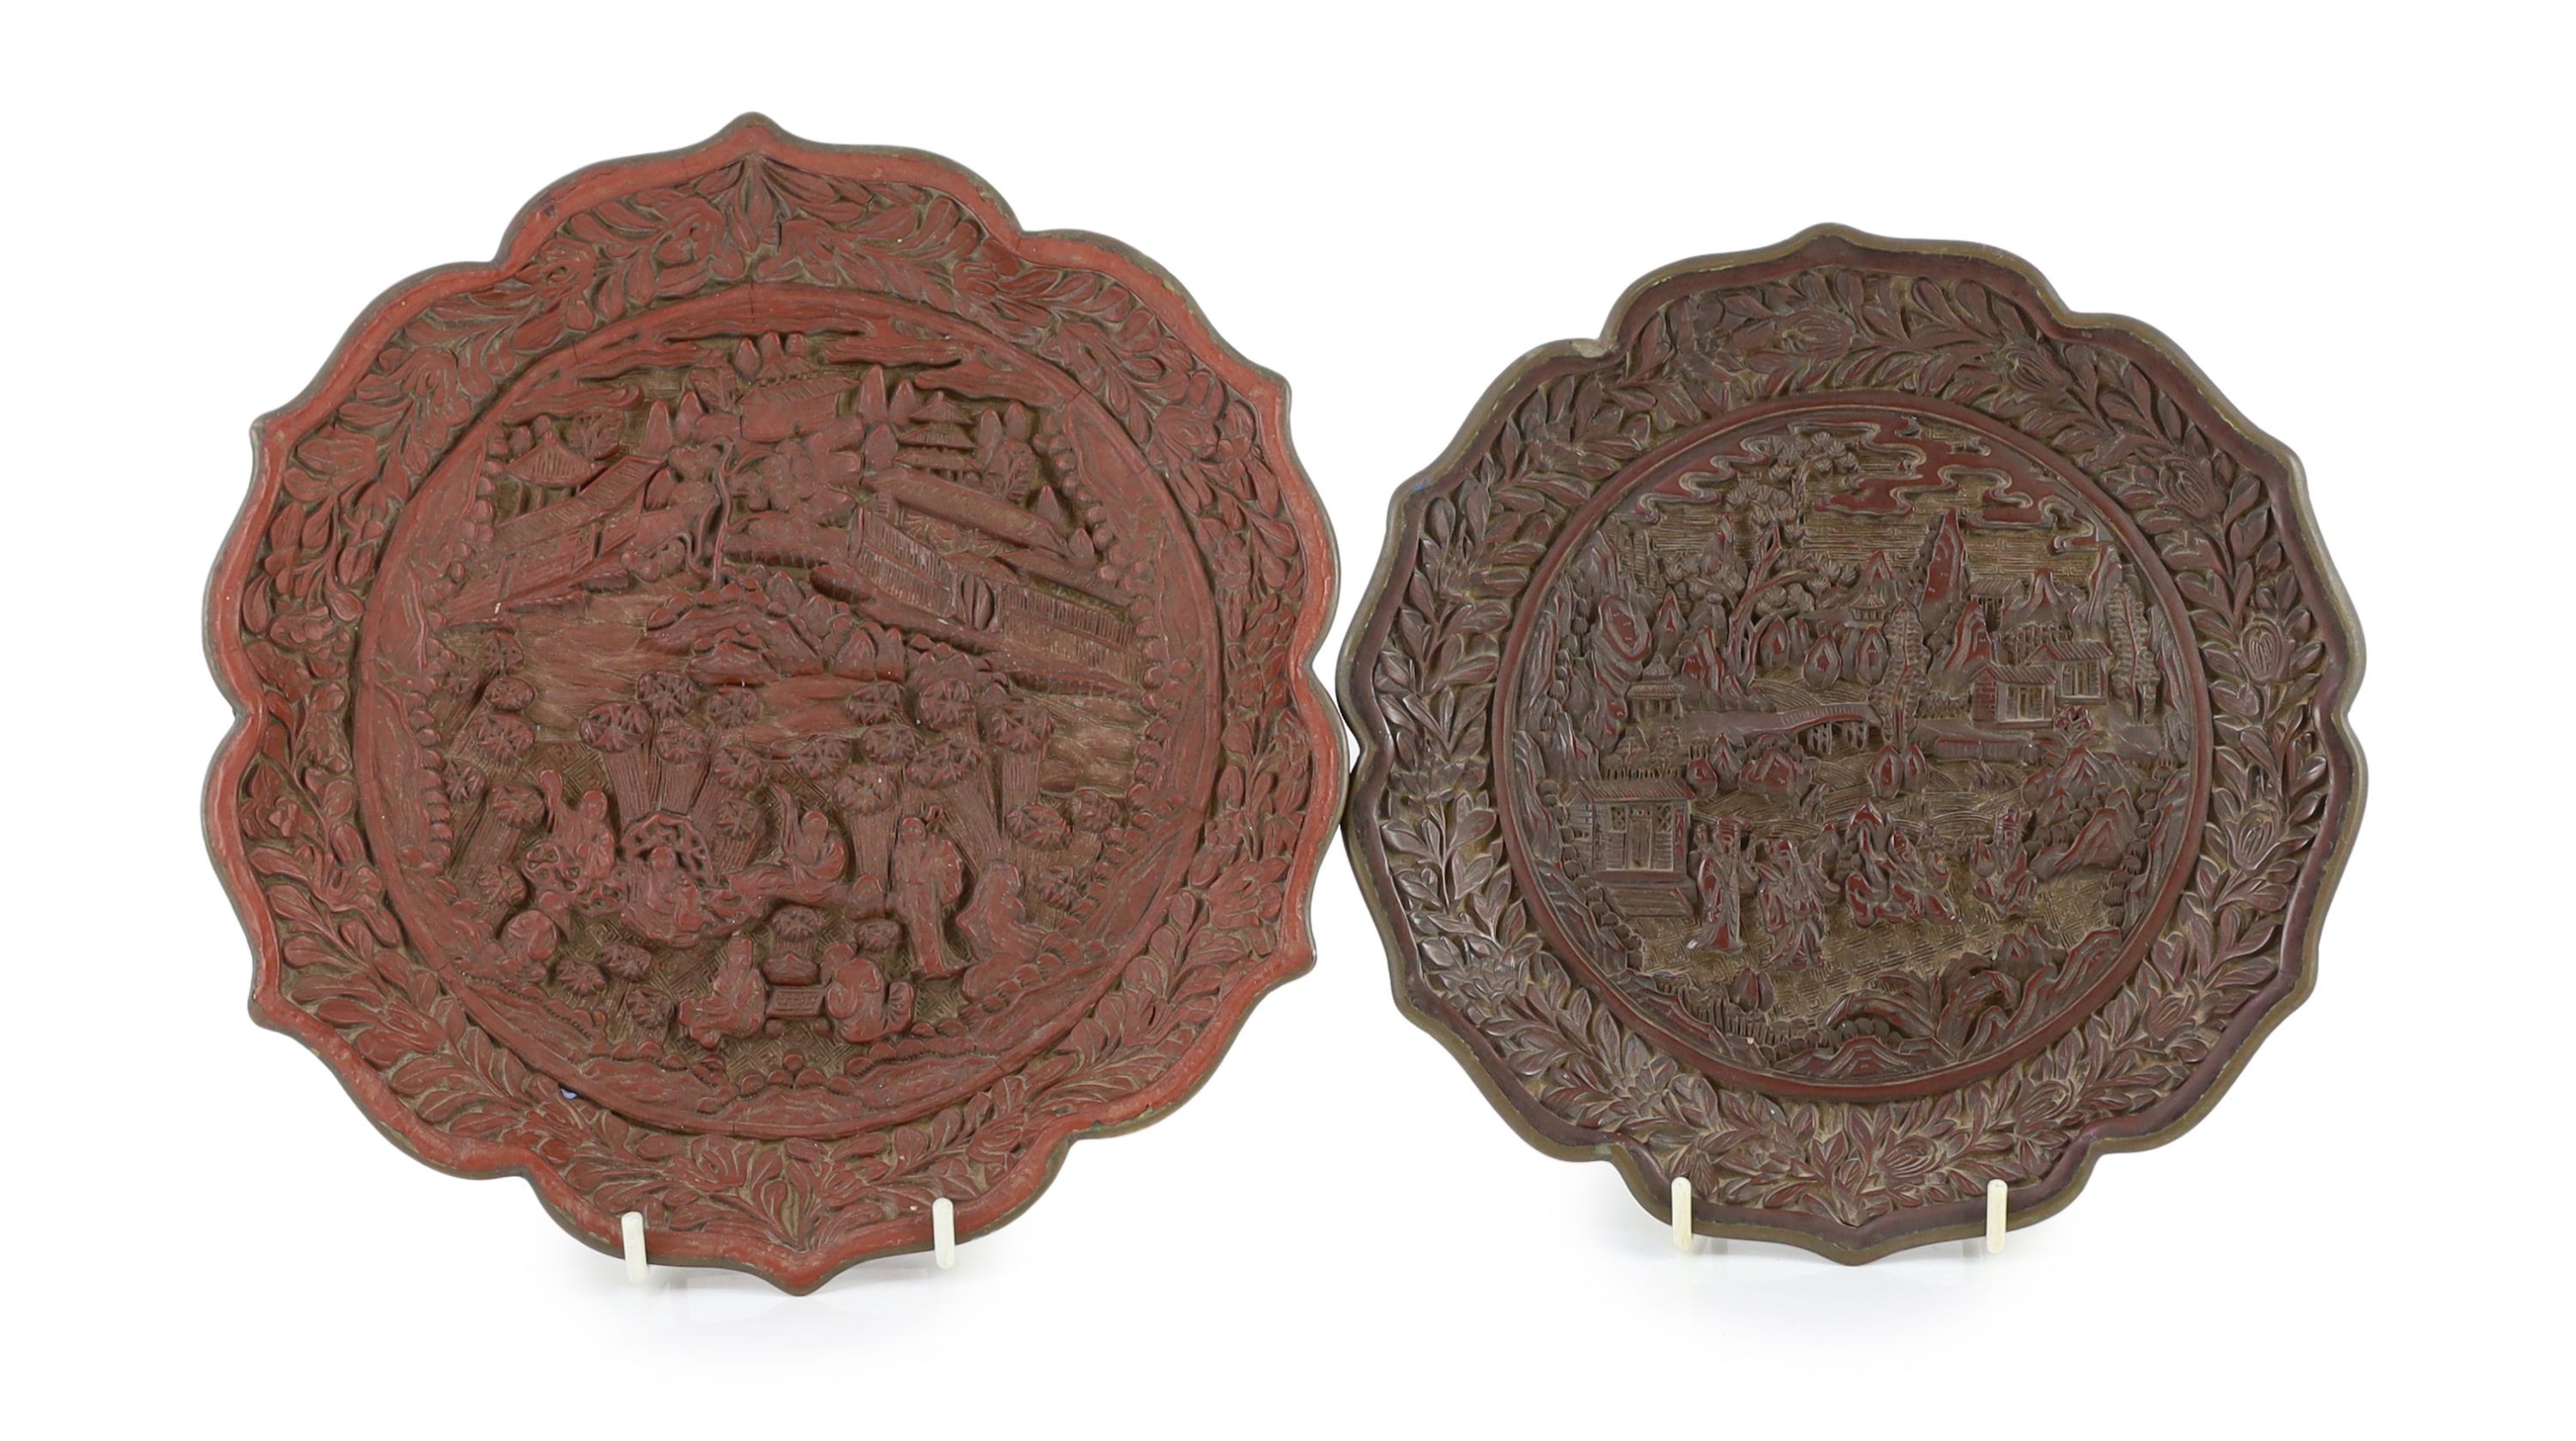 Two similar Chinese cinnabar lacquer dishes, Qianlong marks, late 19th century, 23.5cm & 20.5 cm diameter